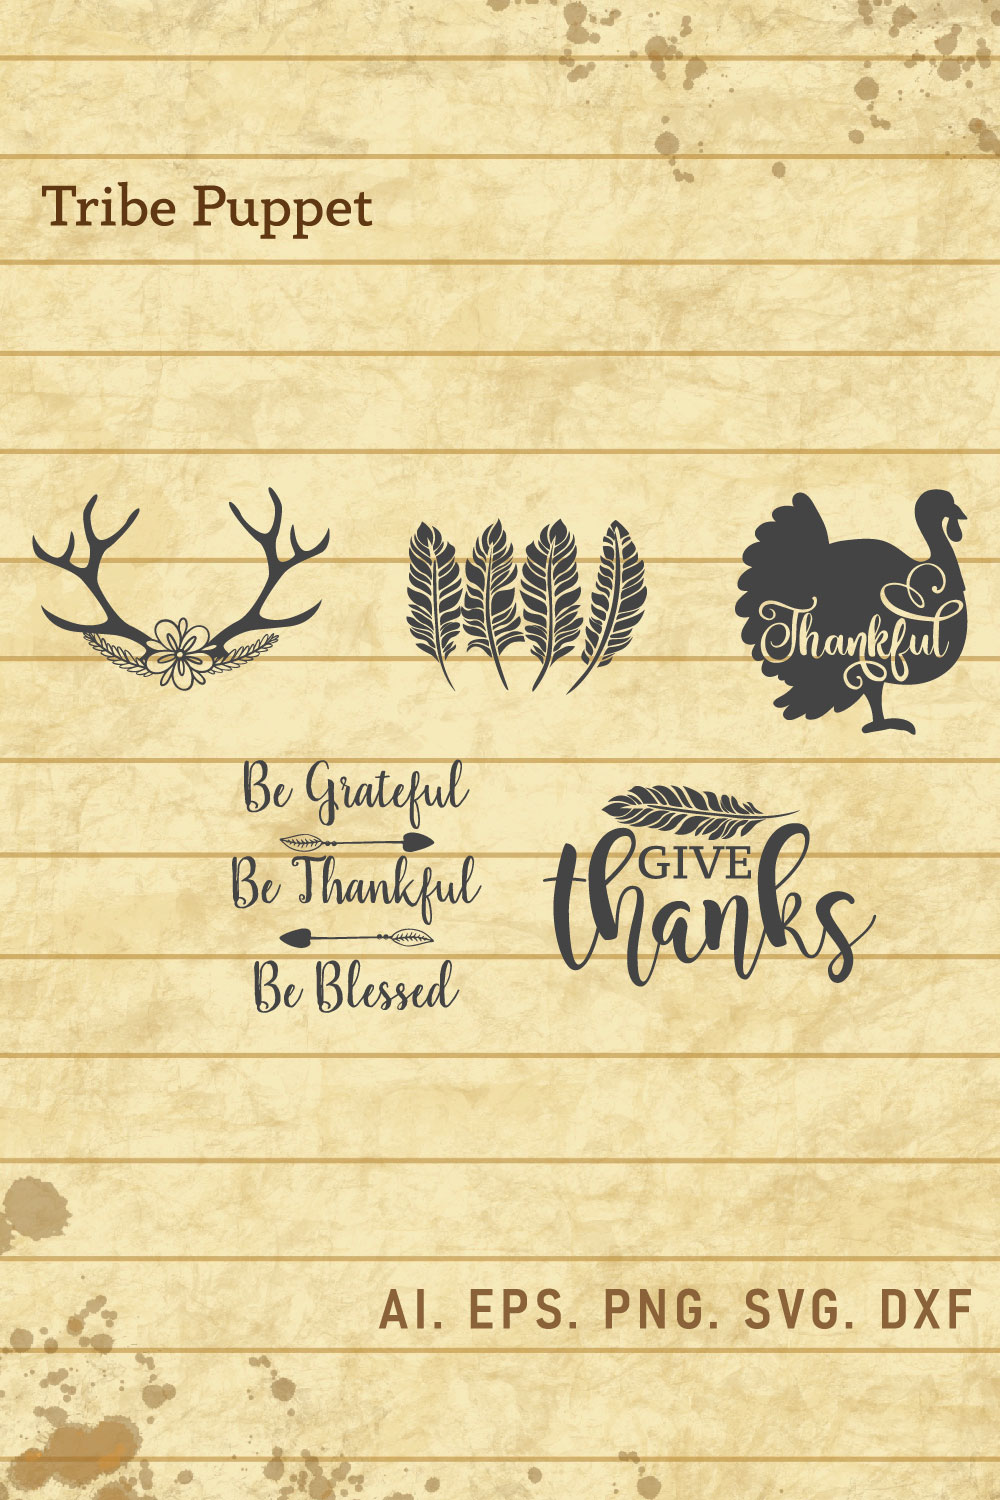 Thankxgiving Quotes 08 pinterest preview image.